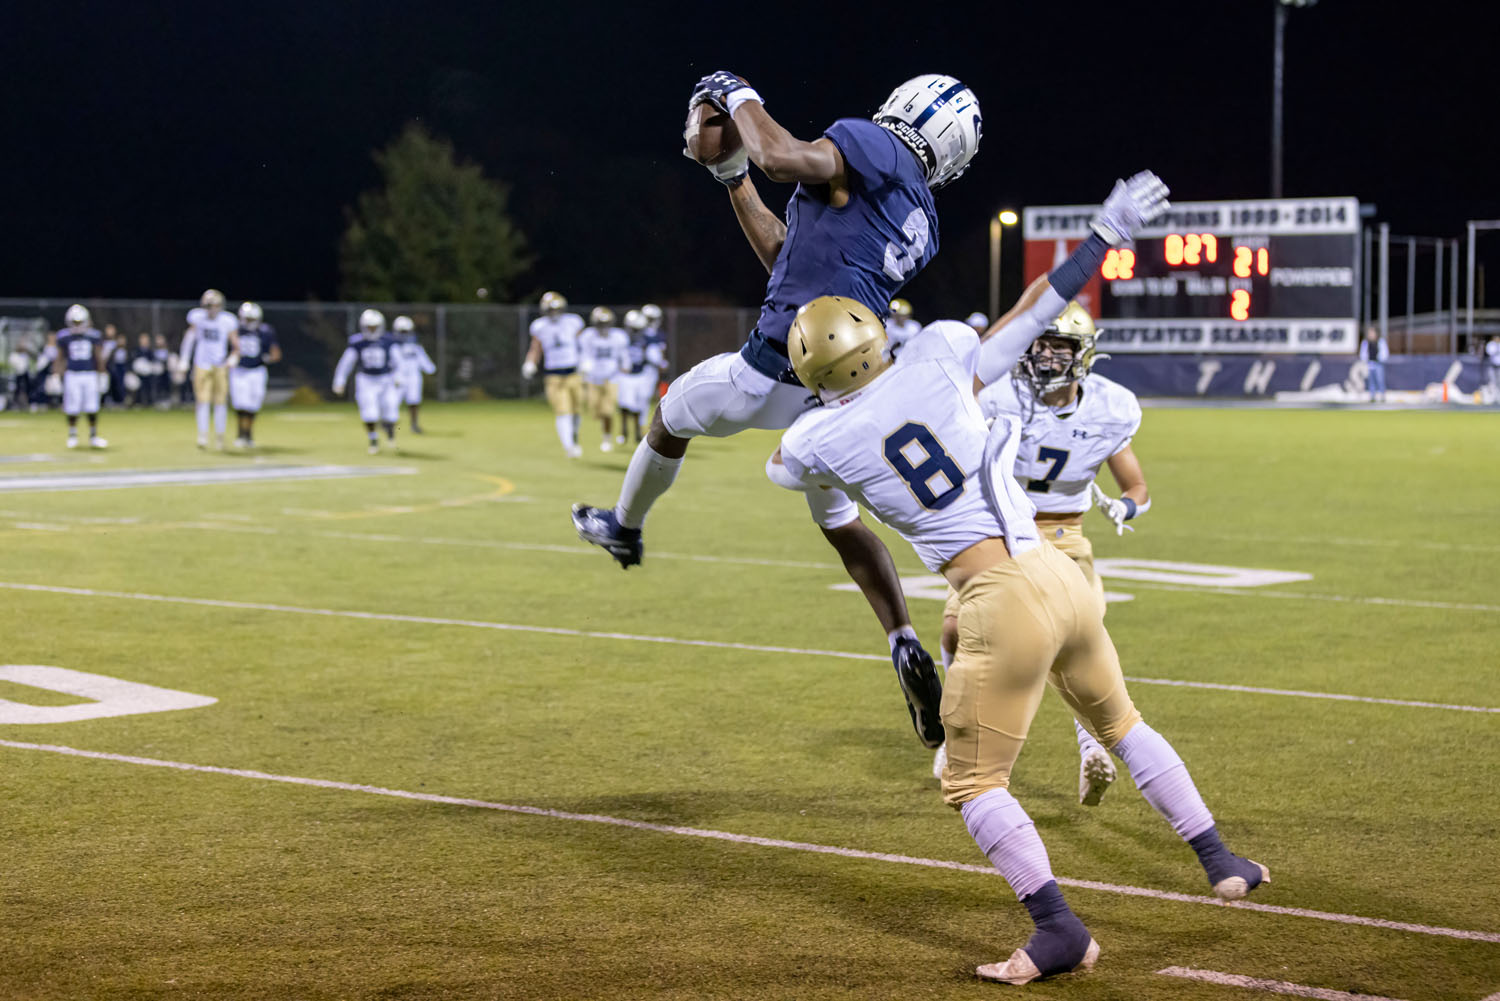 Clay-Chalkville blows out Briarwood Christian